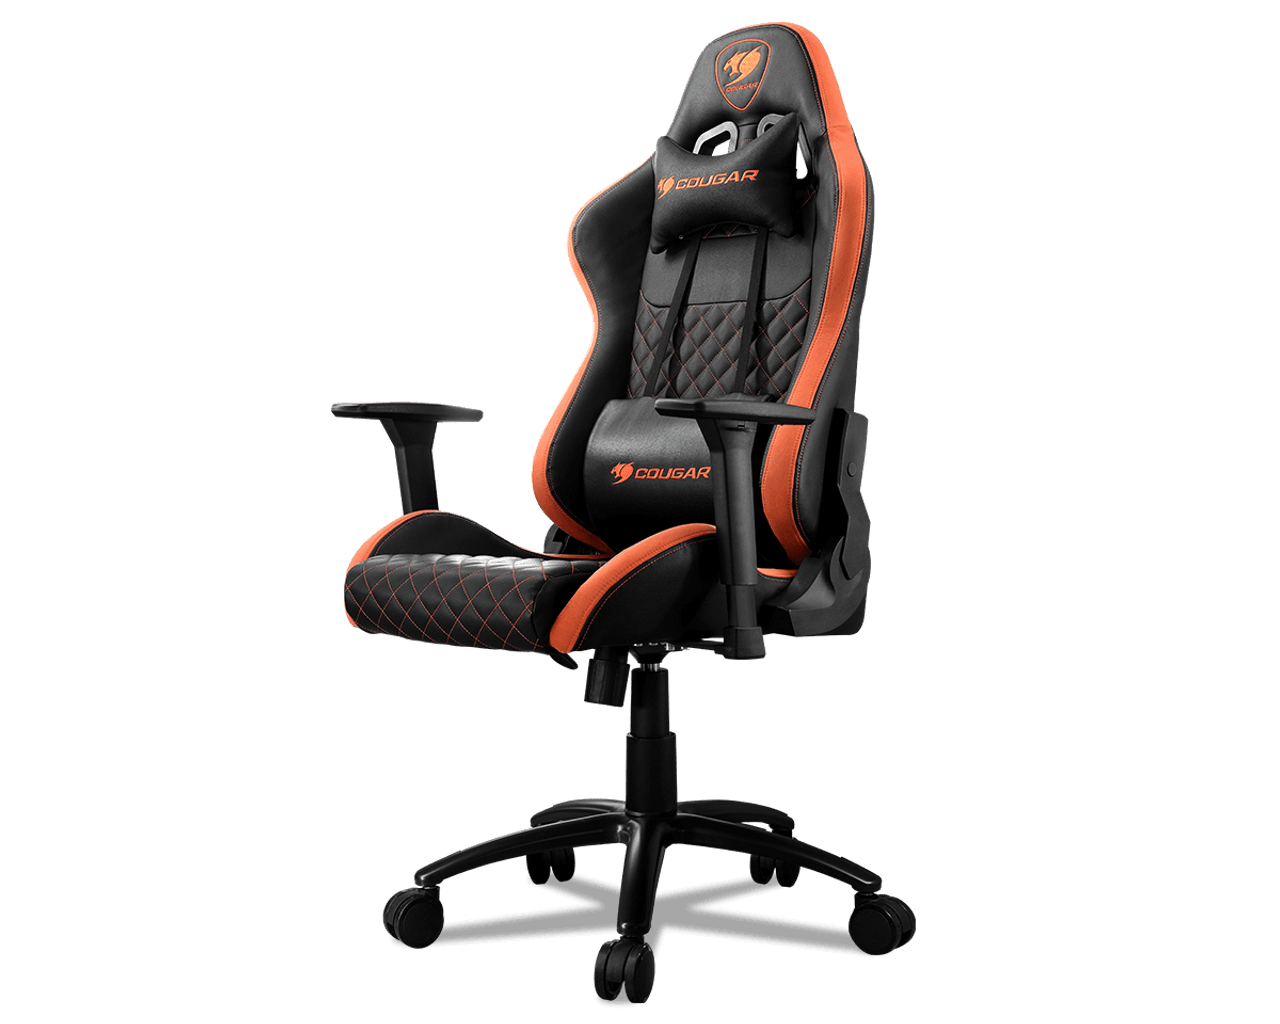 Gaming chair Cougar Armor S black computer, up to 120 kg, PU leather, 4D,  180°